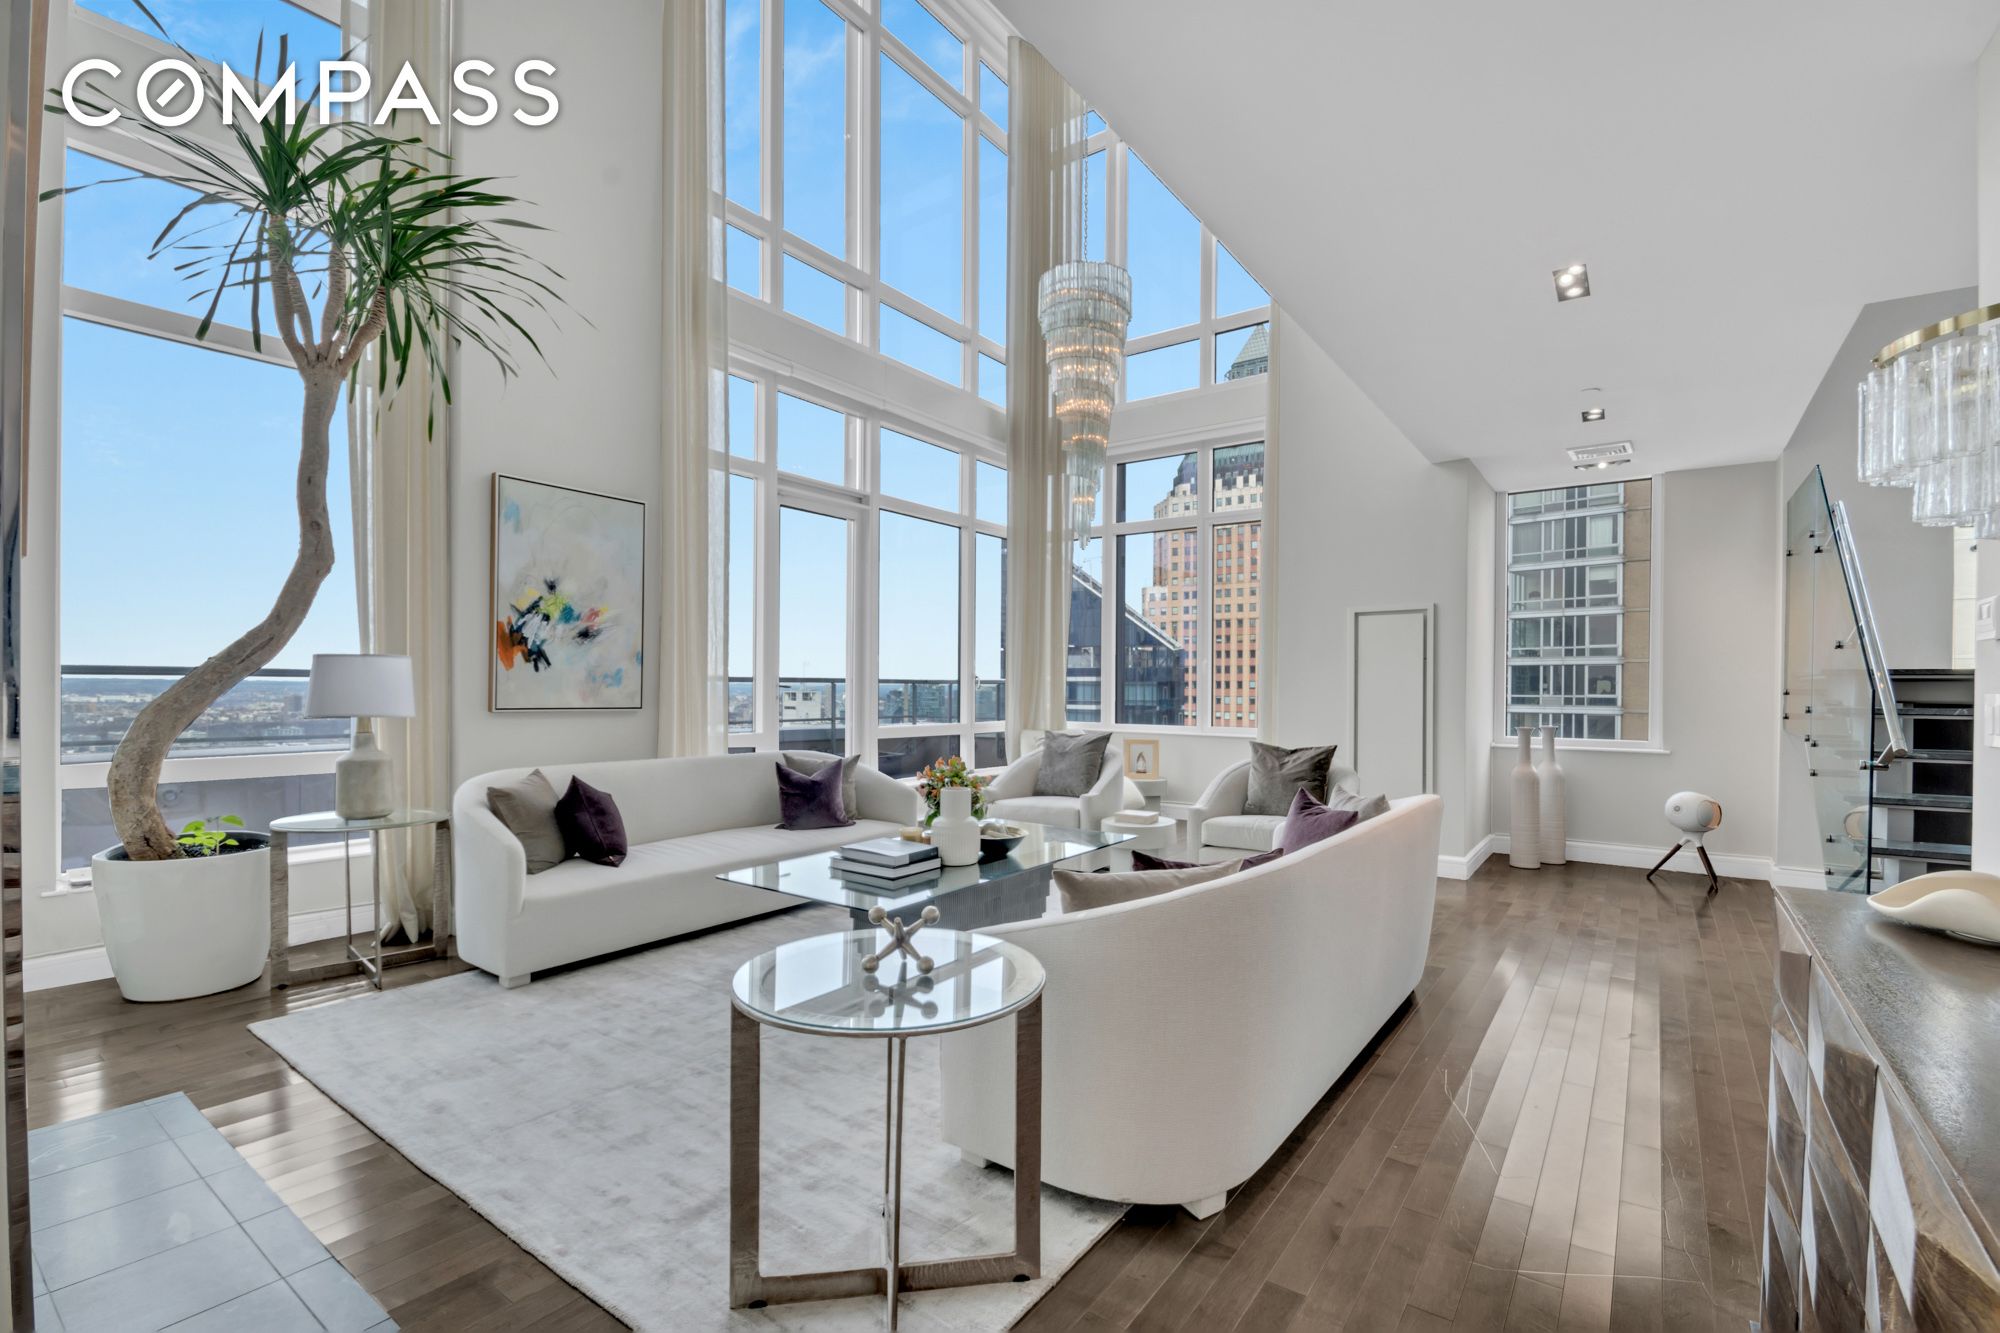 247 West 46th Street Ph2, Theater District, Midtown West, NYC - 4 Bedrooms  
4.5 Bathrooms  
9 Rooms - 